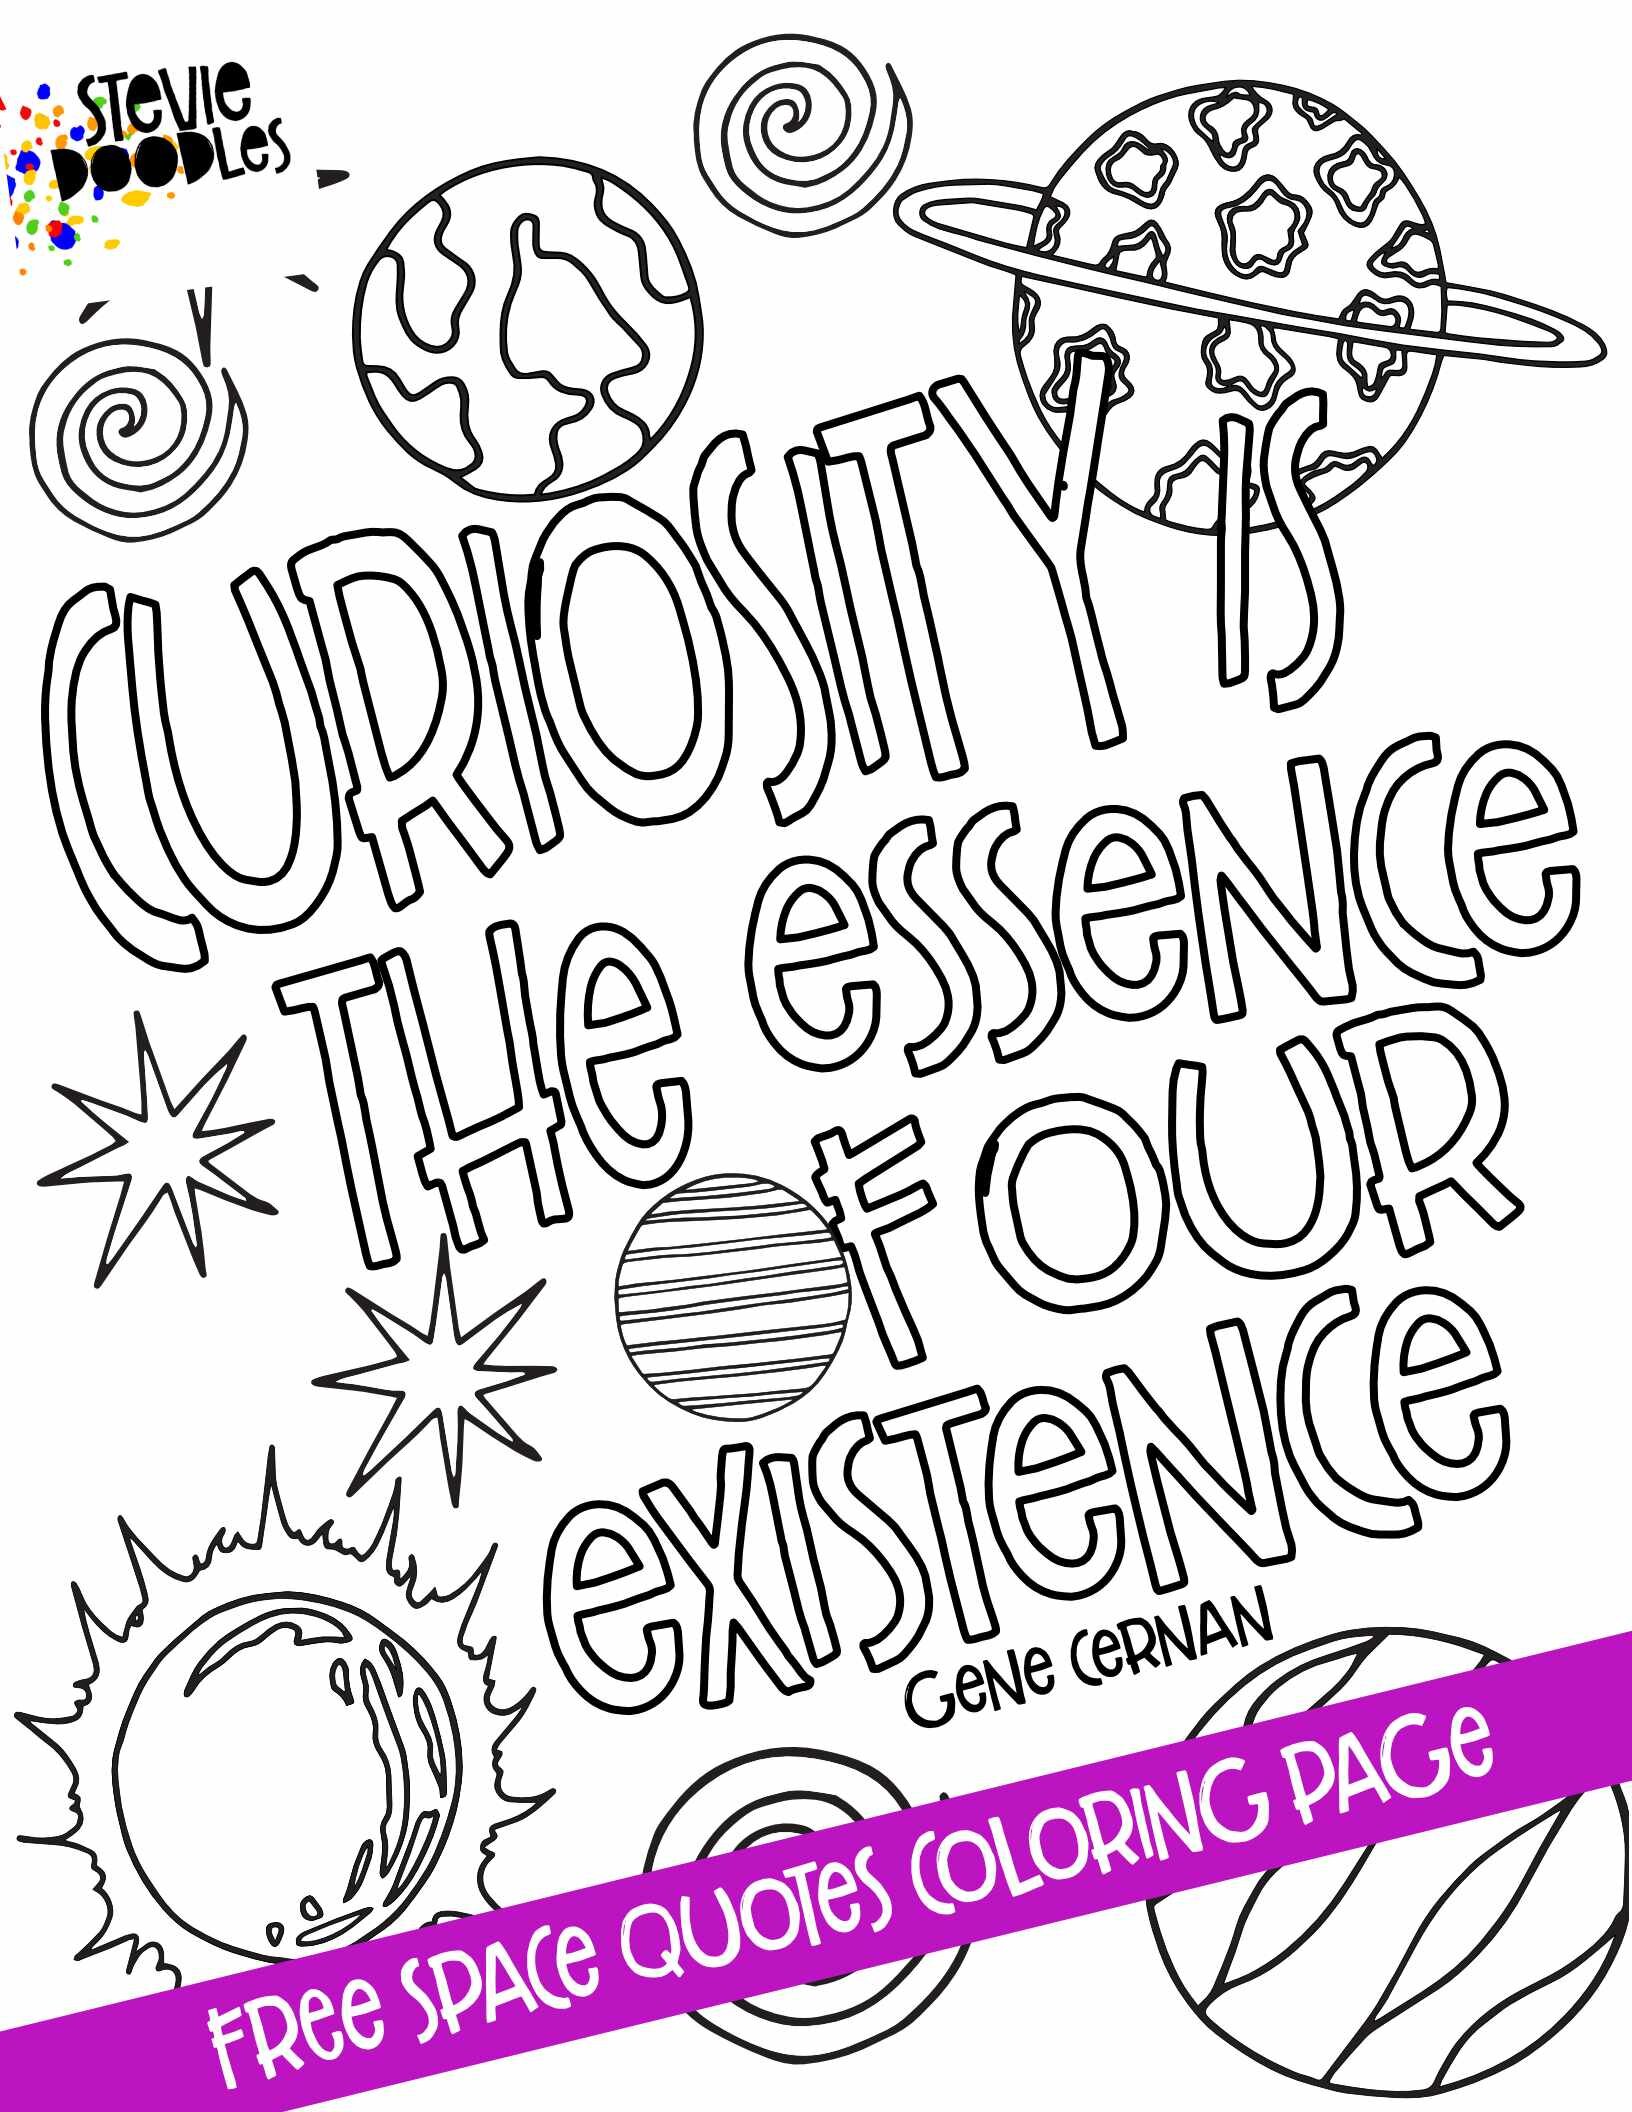 8 Quote Coloring Pages about SPACE! This Gene Cernan quote + other awesome space quotes